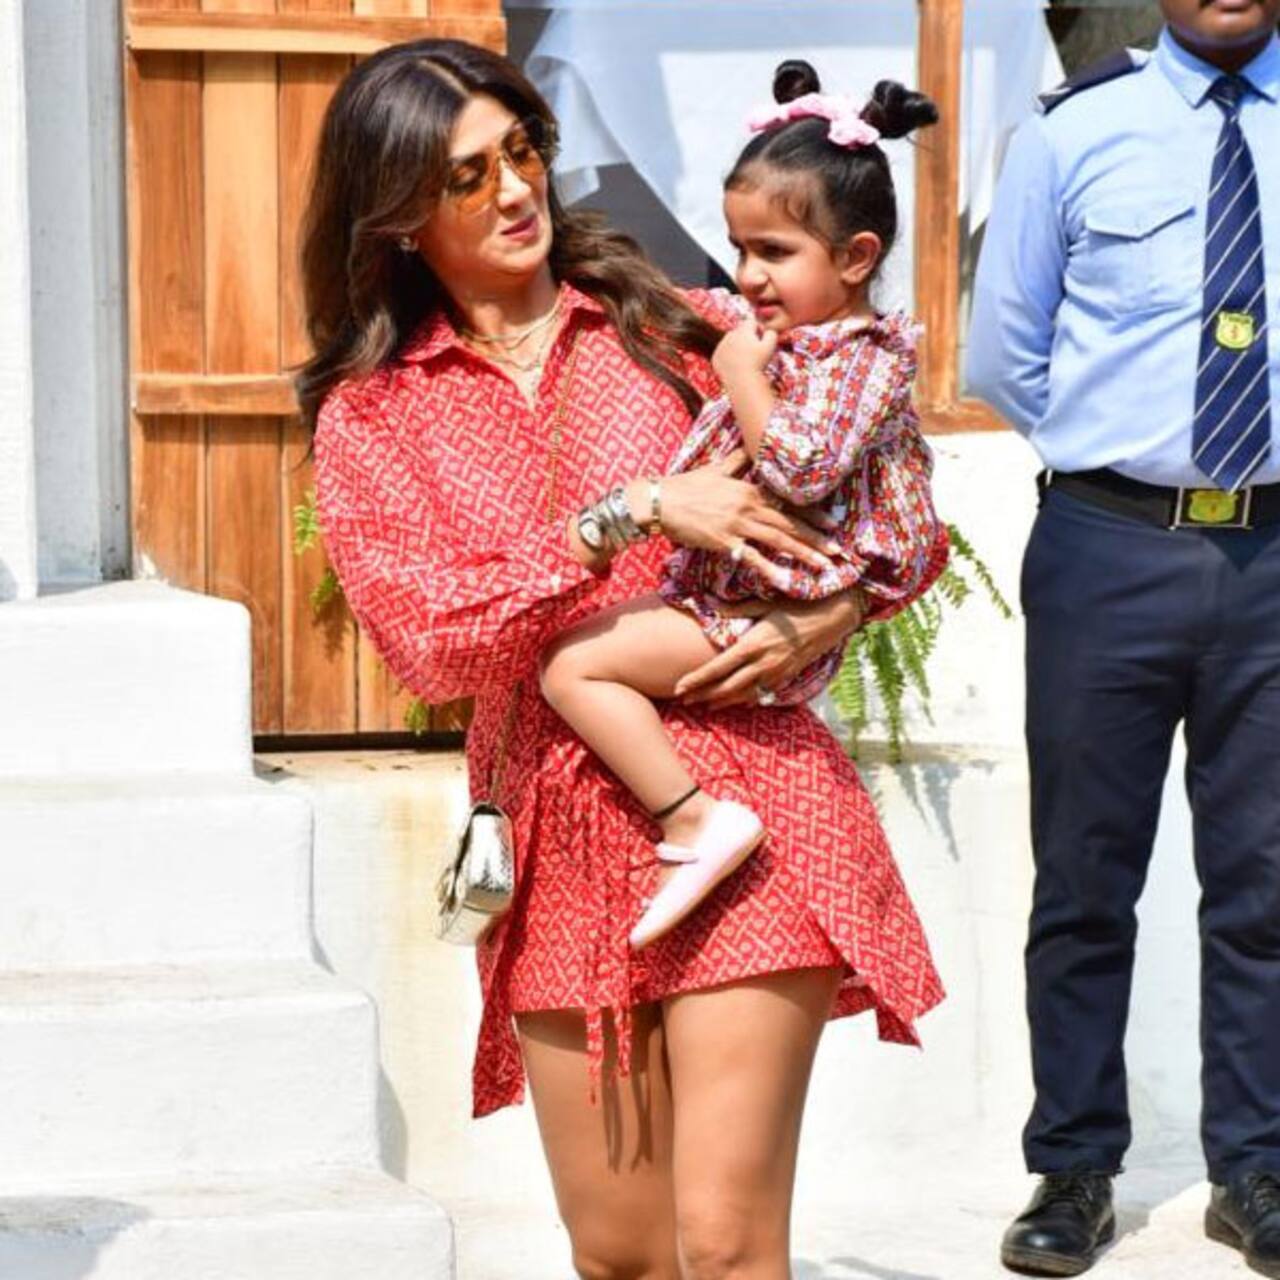 Shilpa Shetty looks extremely elated in this picture